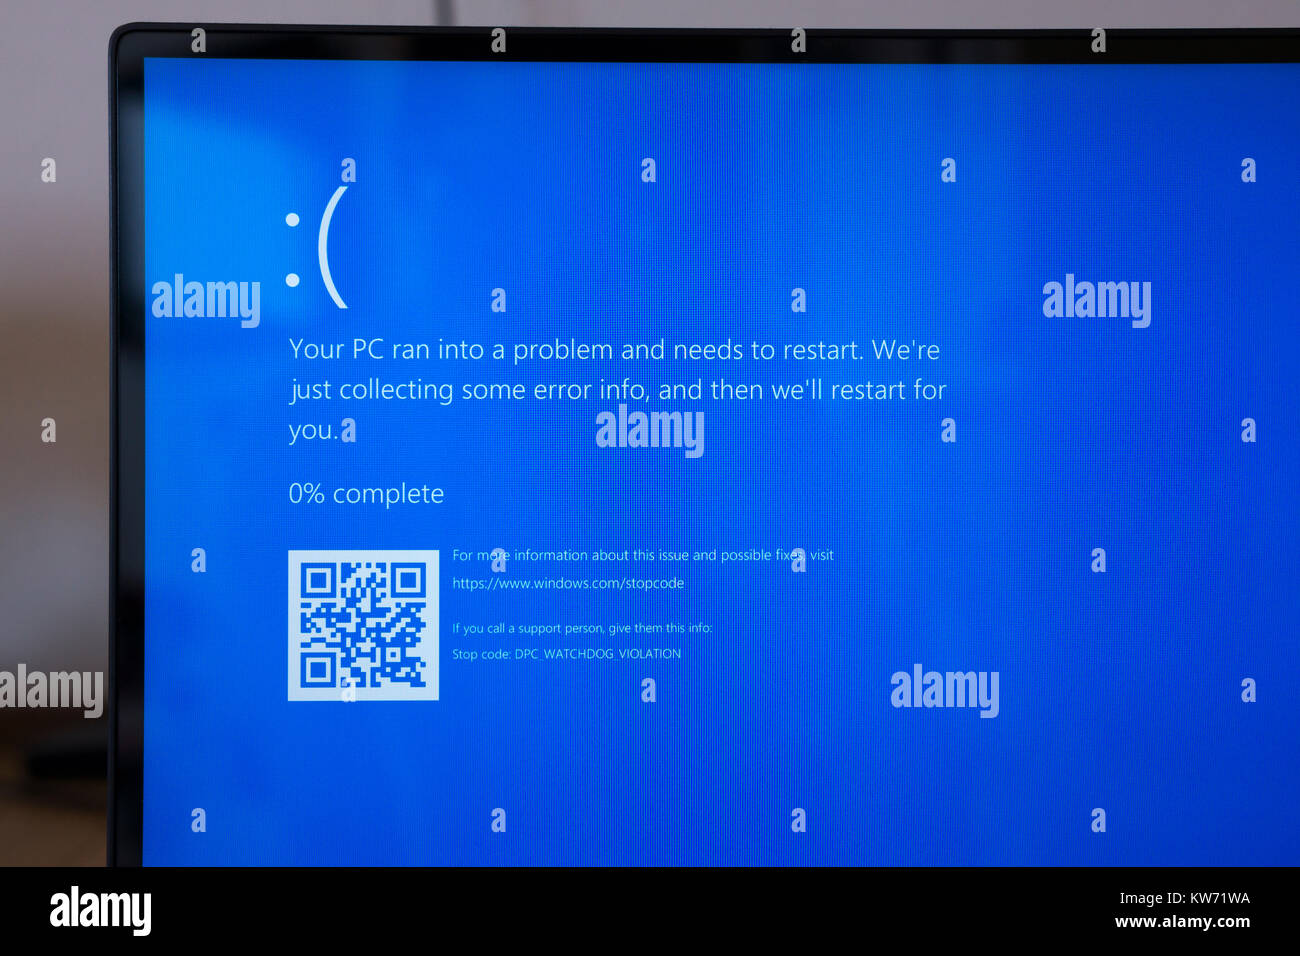 A laptop screen showing 'Your PC ran into a problem and needs to restart.' Theme - computer problems, crash, blue screen, error, broken Stock Photo